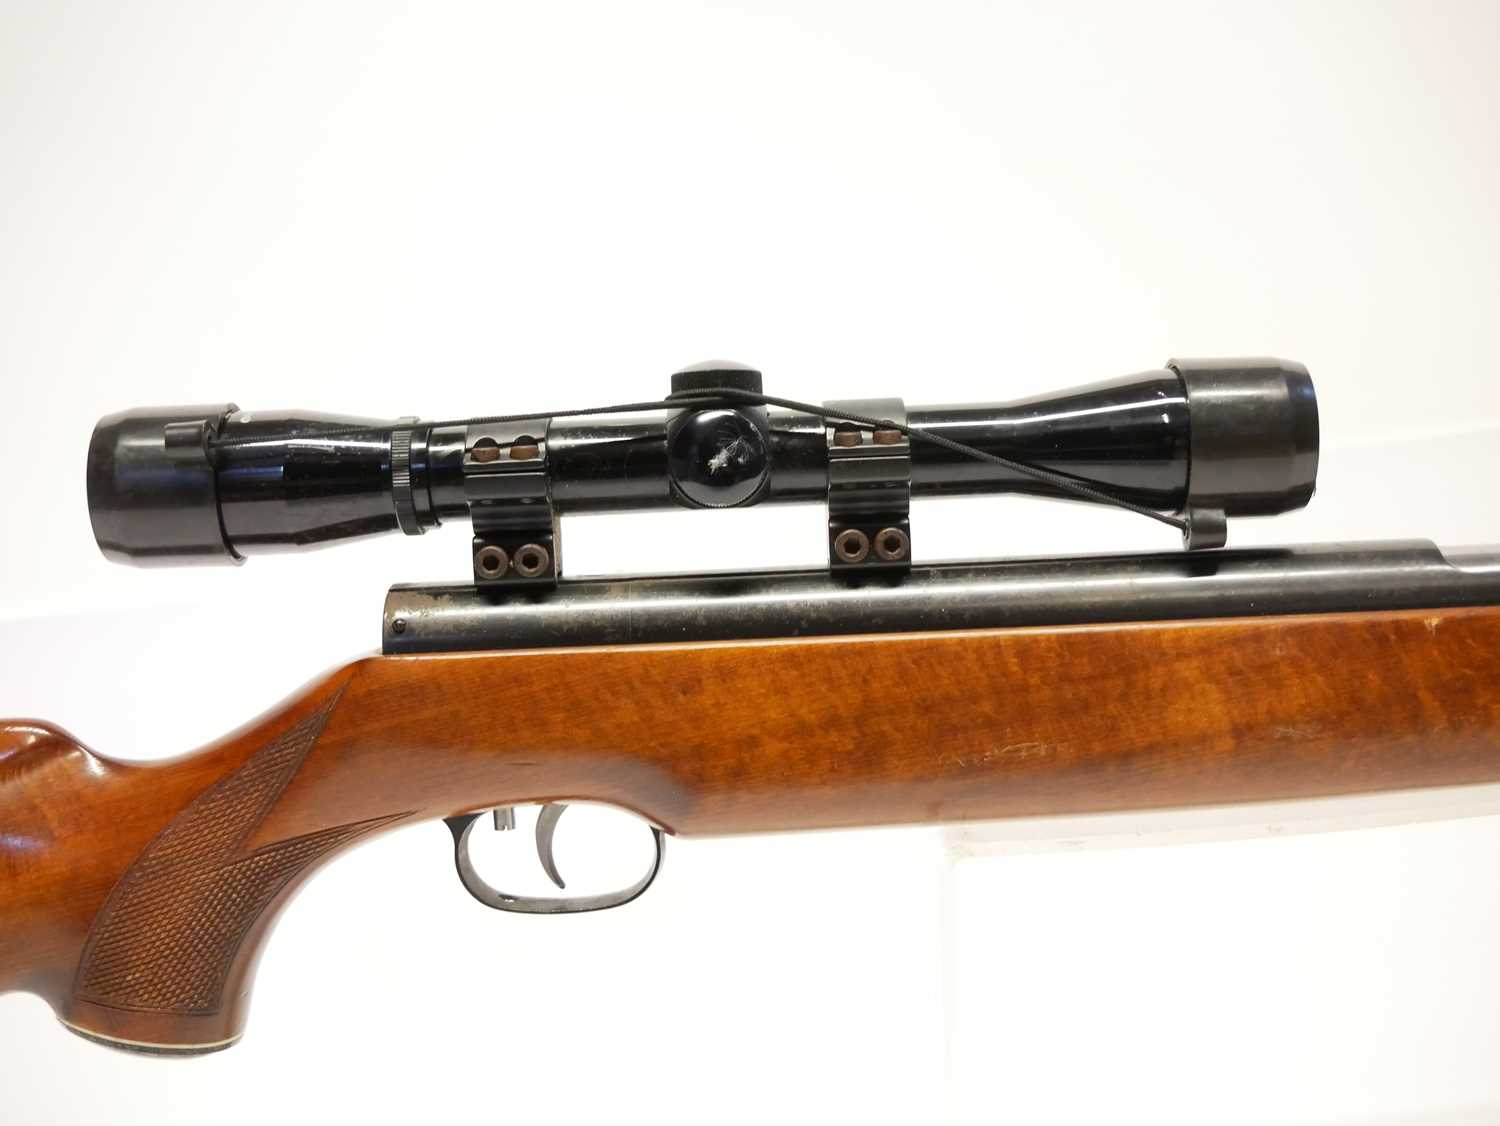 Weihrauch HW77 .22 air rifle serial number 1002371, 18 inch barrel, with Apollo 4x32 scope and a - Image 4 of 10